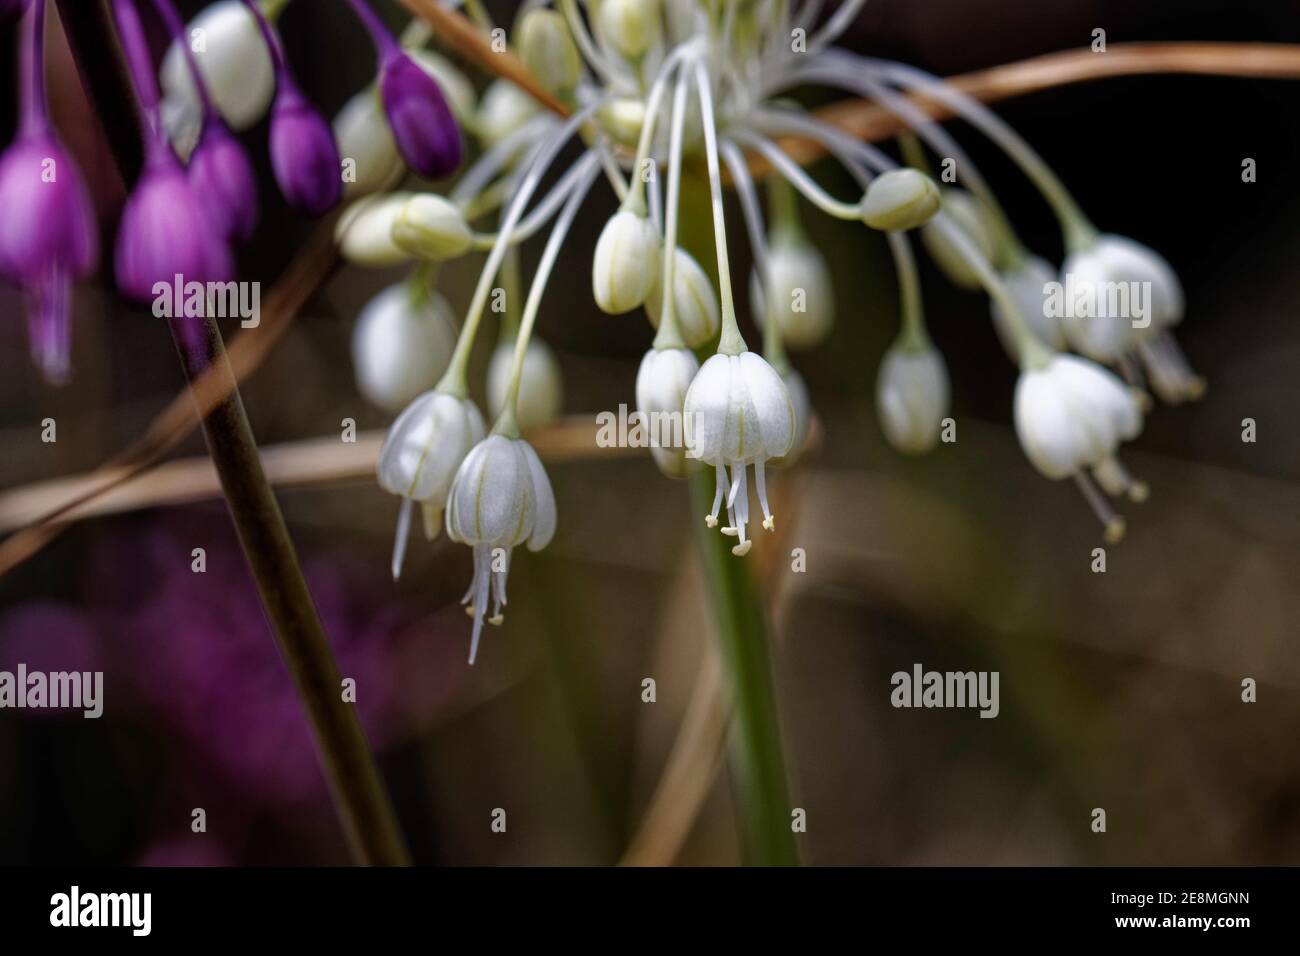 Allium carinatum, the keeled garlic or witch's garlic, is a perennial plant up to 60 cm tall. It is widespread across central and southern Europe, Stock Photo